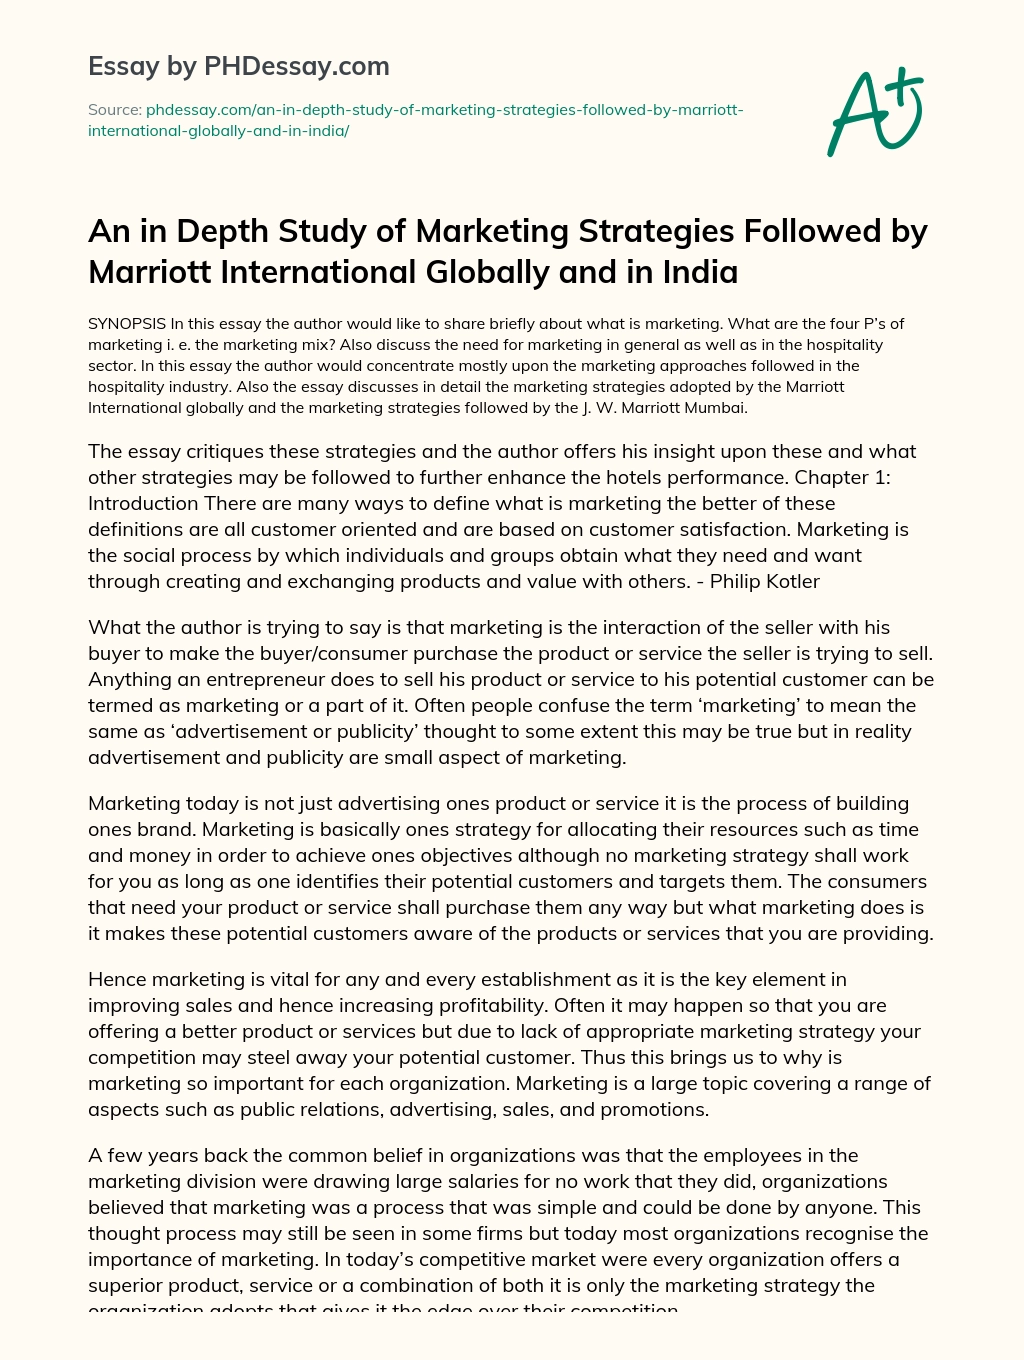 An in Depth Study of Marketing Strategies Followed by Marriott International Globally and in India essay